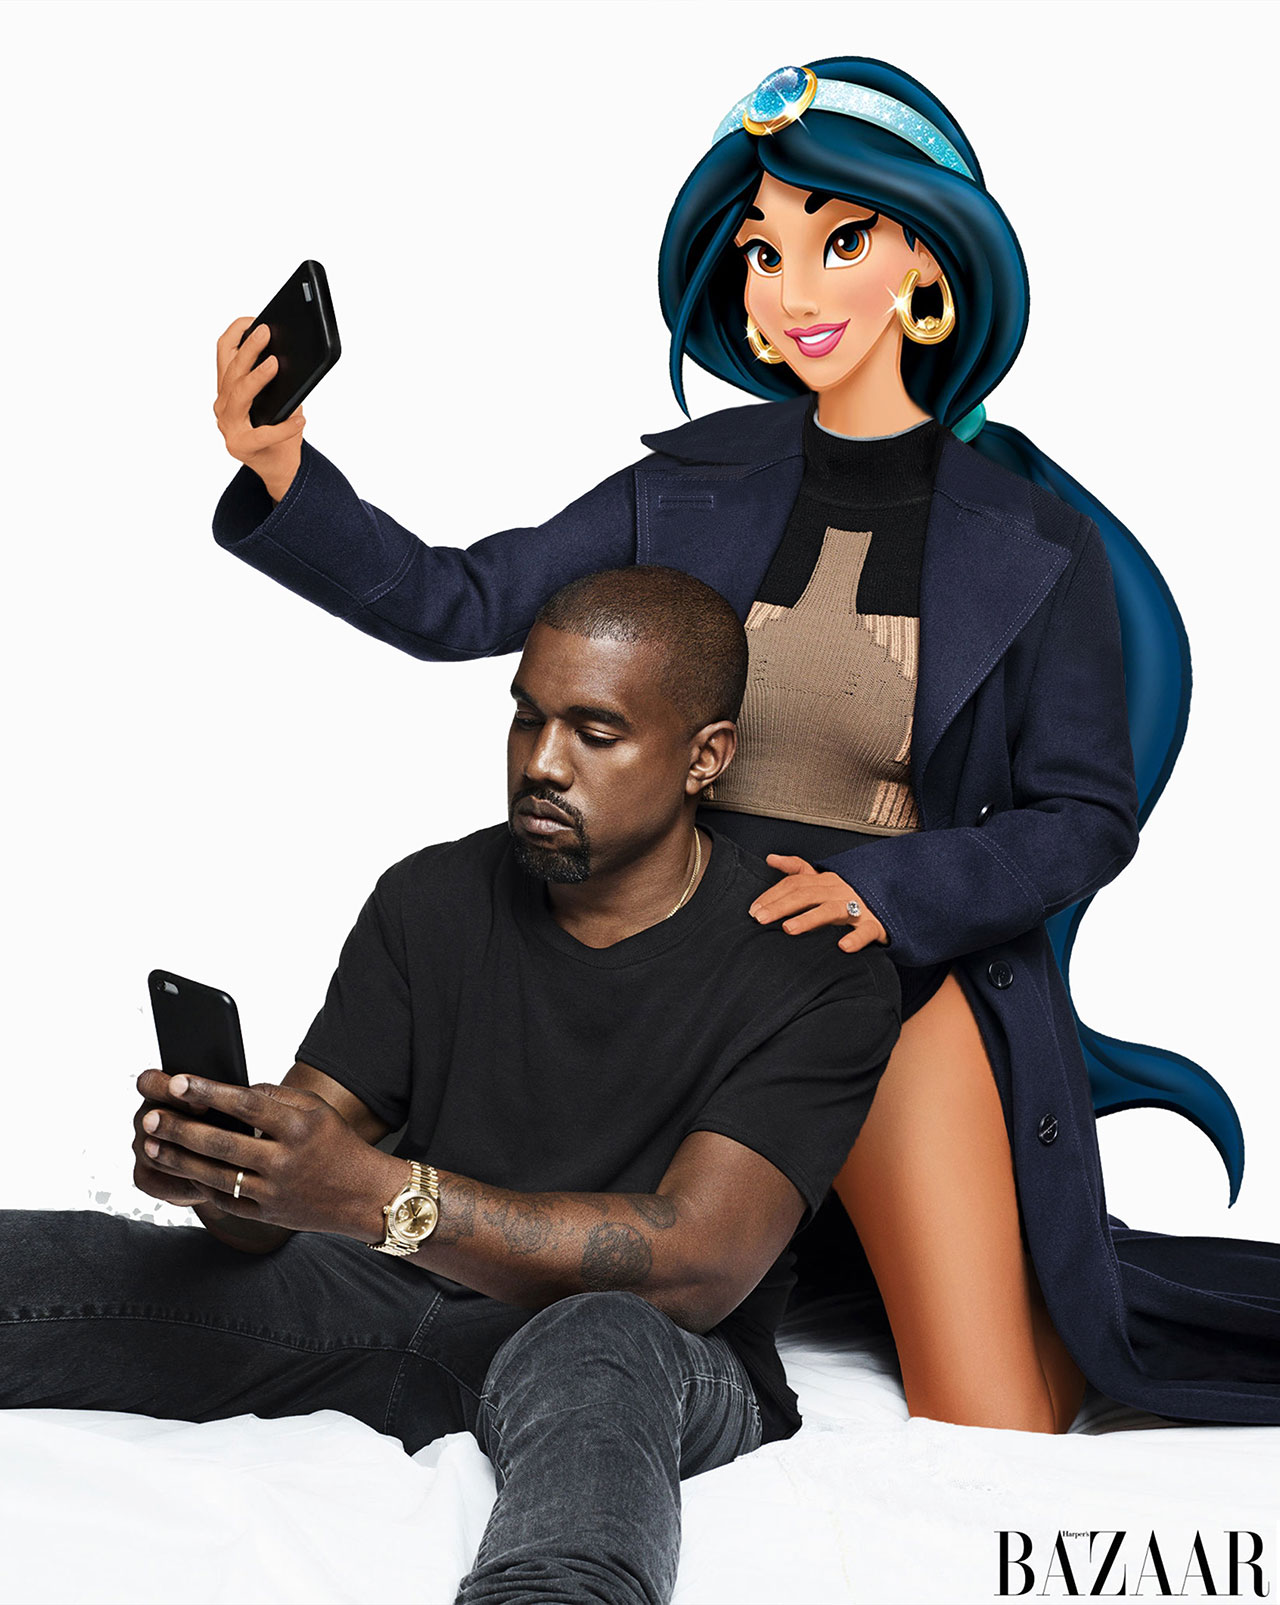 Kim Kardashian as Jasmine with Kanye West in Harper's Bazaar US September issue. Photographed by Karl Lagerfeld, styled by Carine Roitfeld, photo edit by Gregory Masouras.